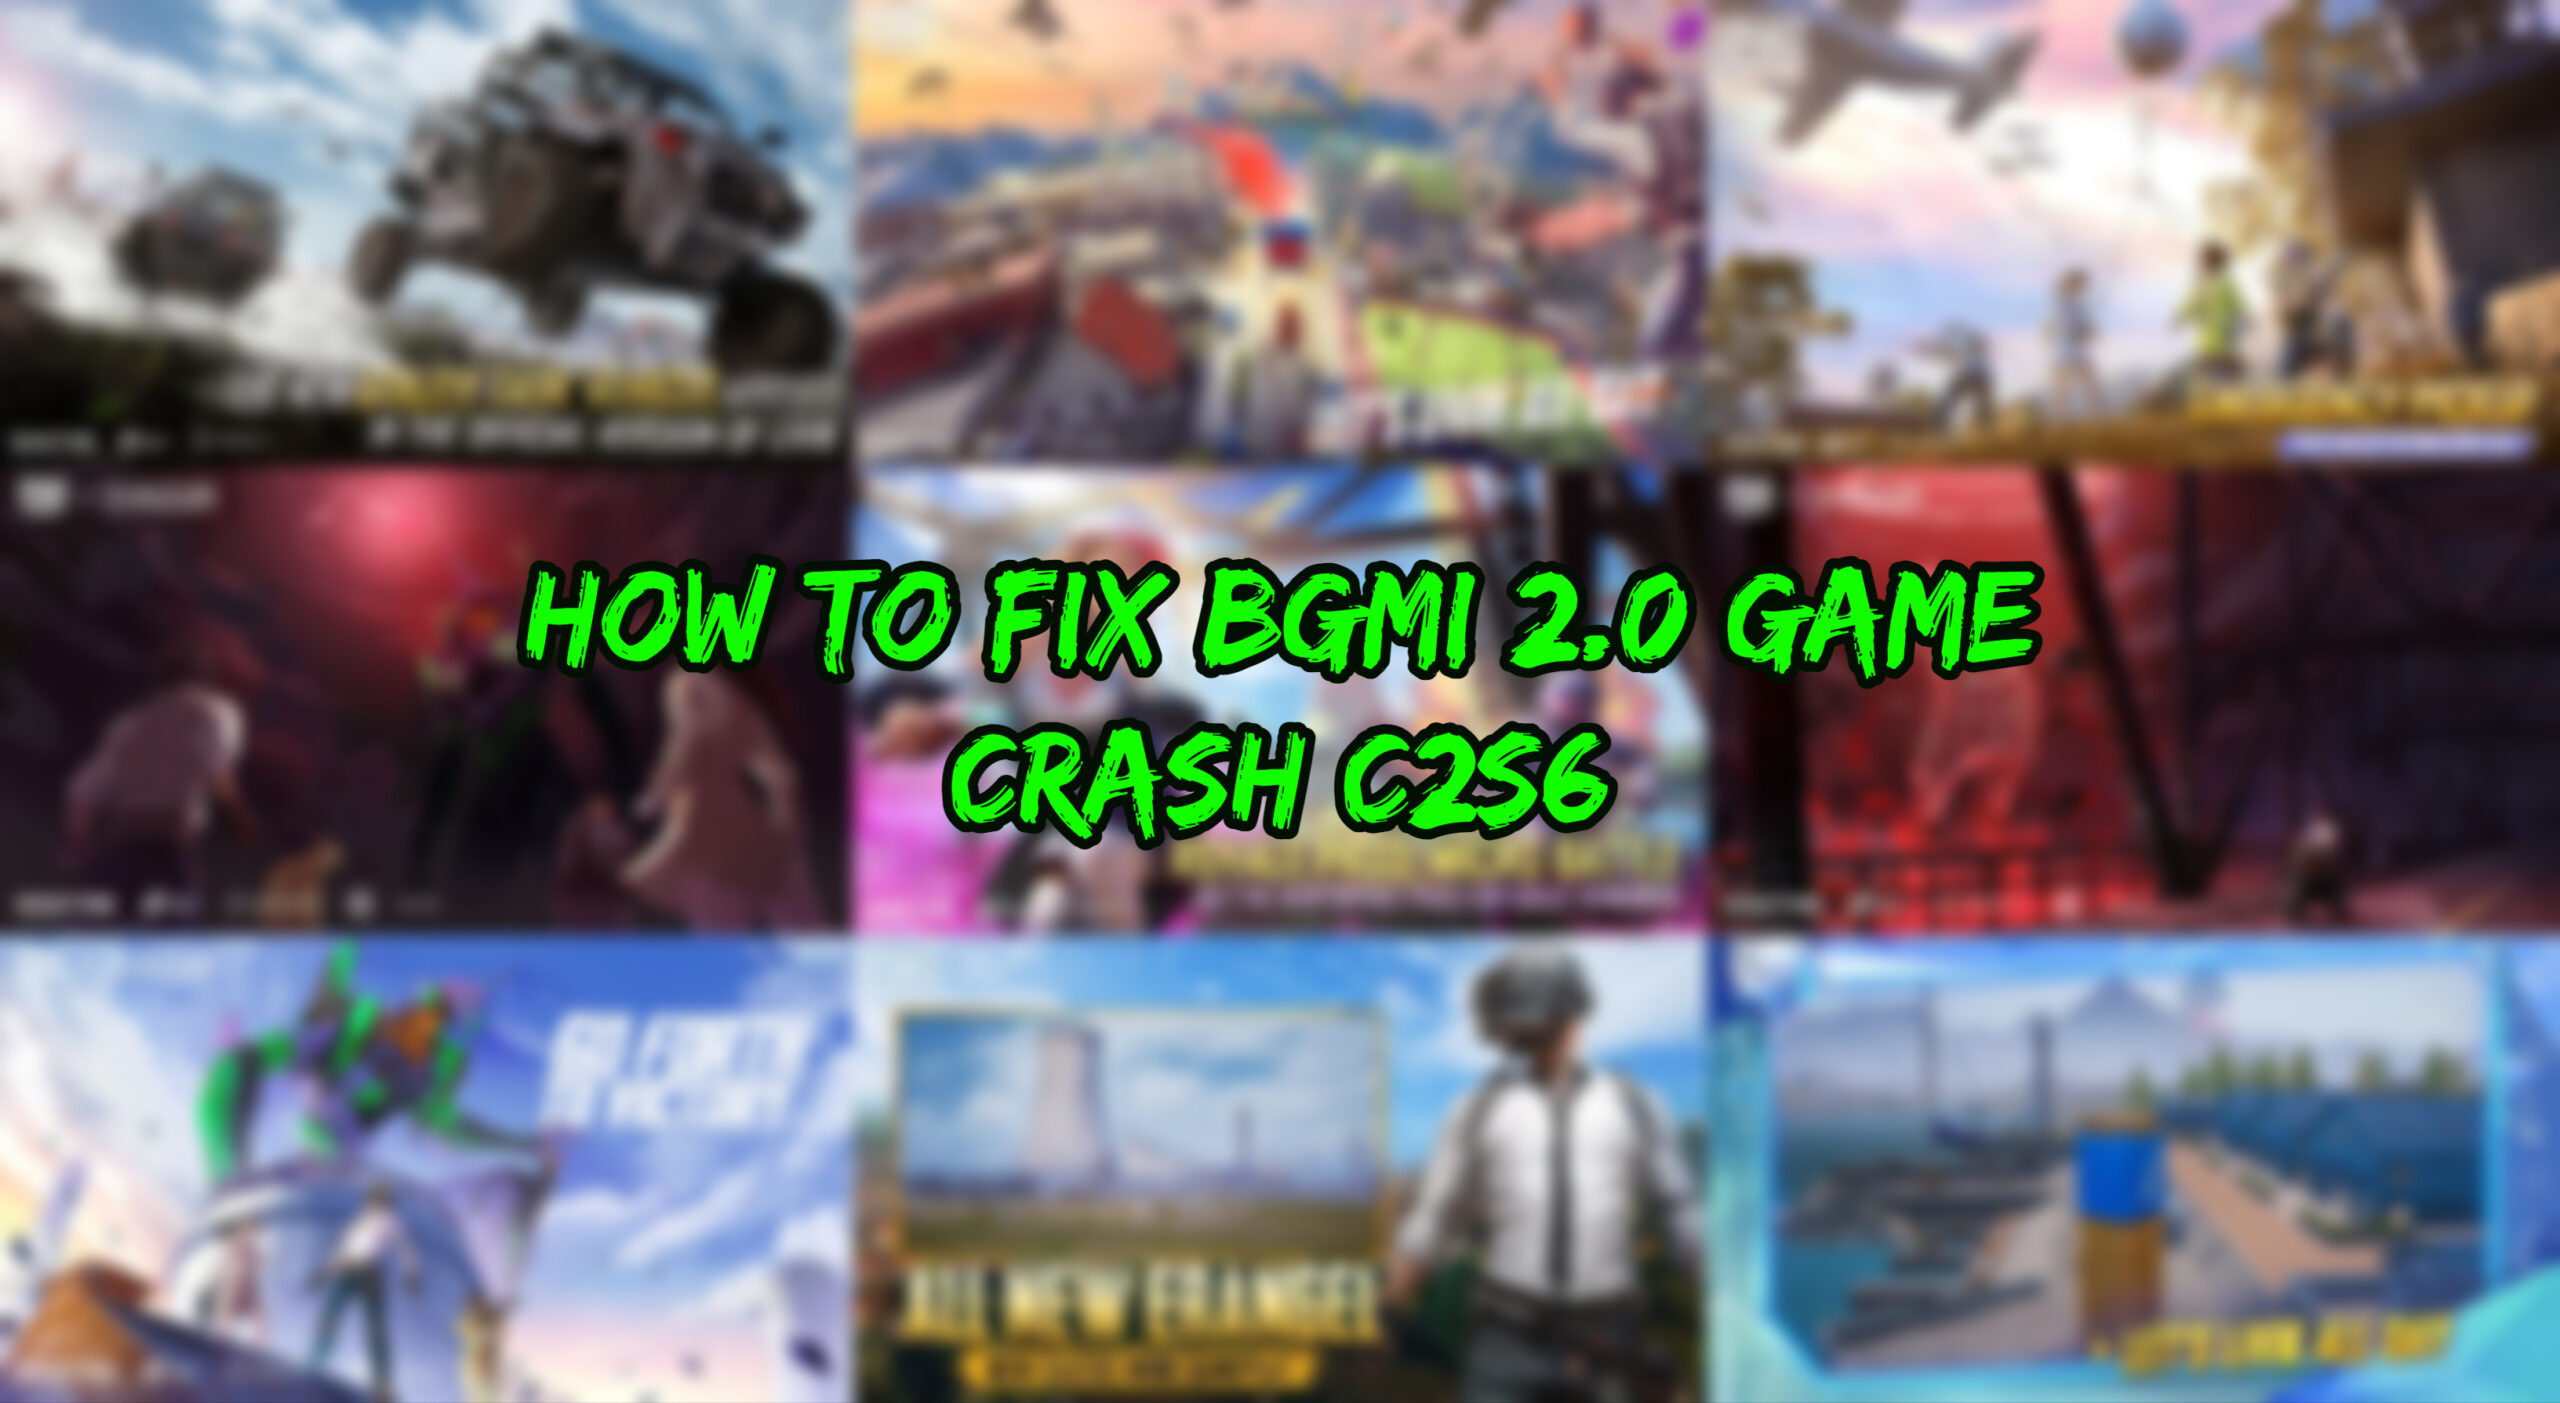 You are currently viewing How To Fix BGMI 2.0 Game Crash C2S6